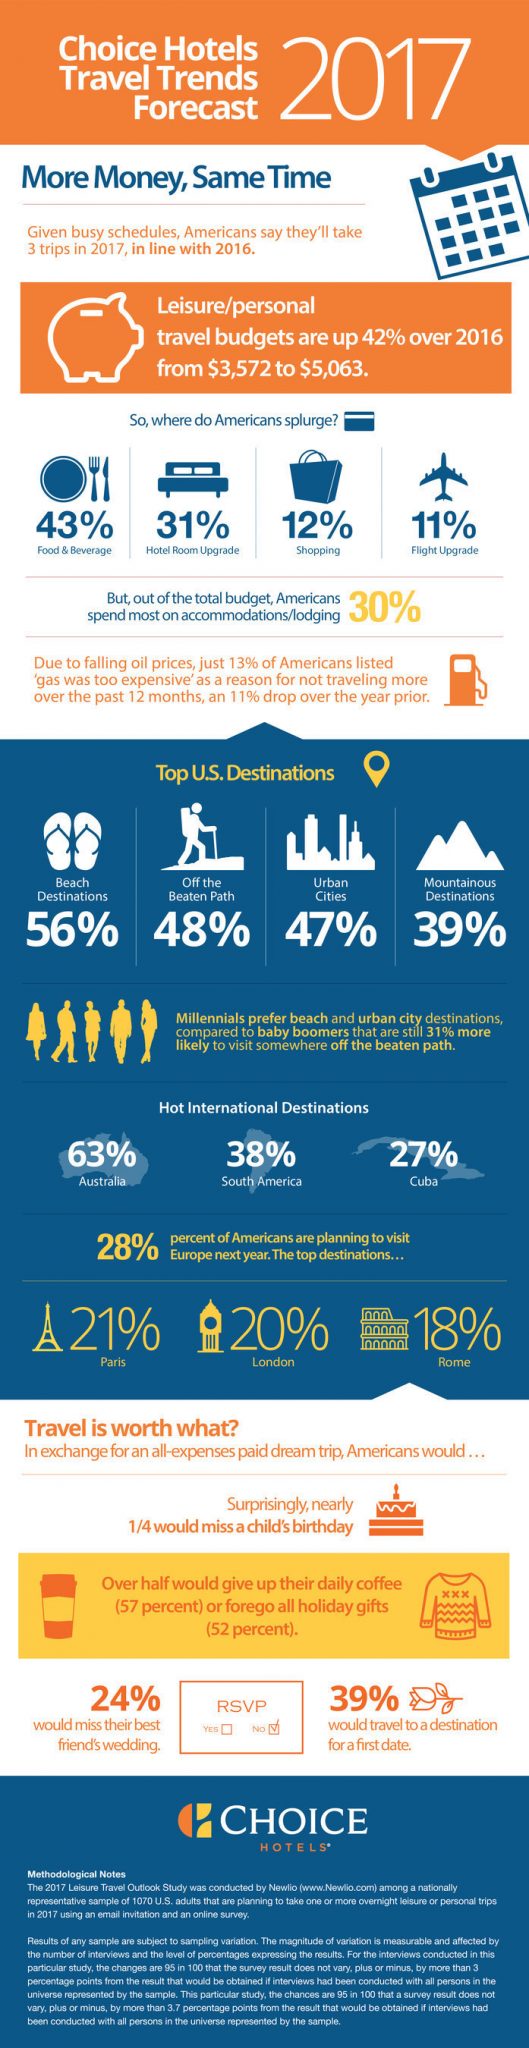 2017 Travel Trends Outlook